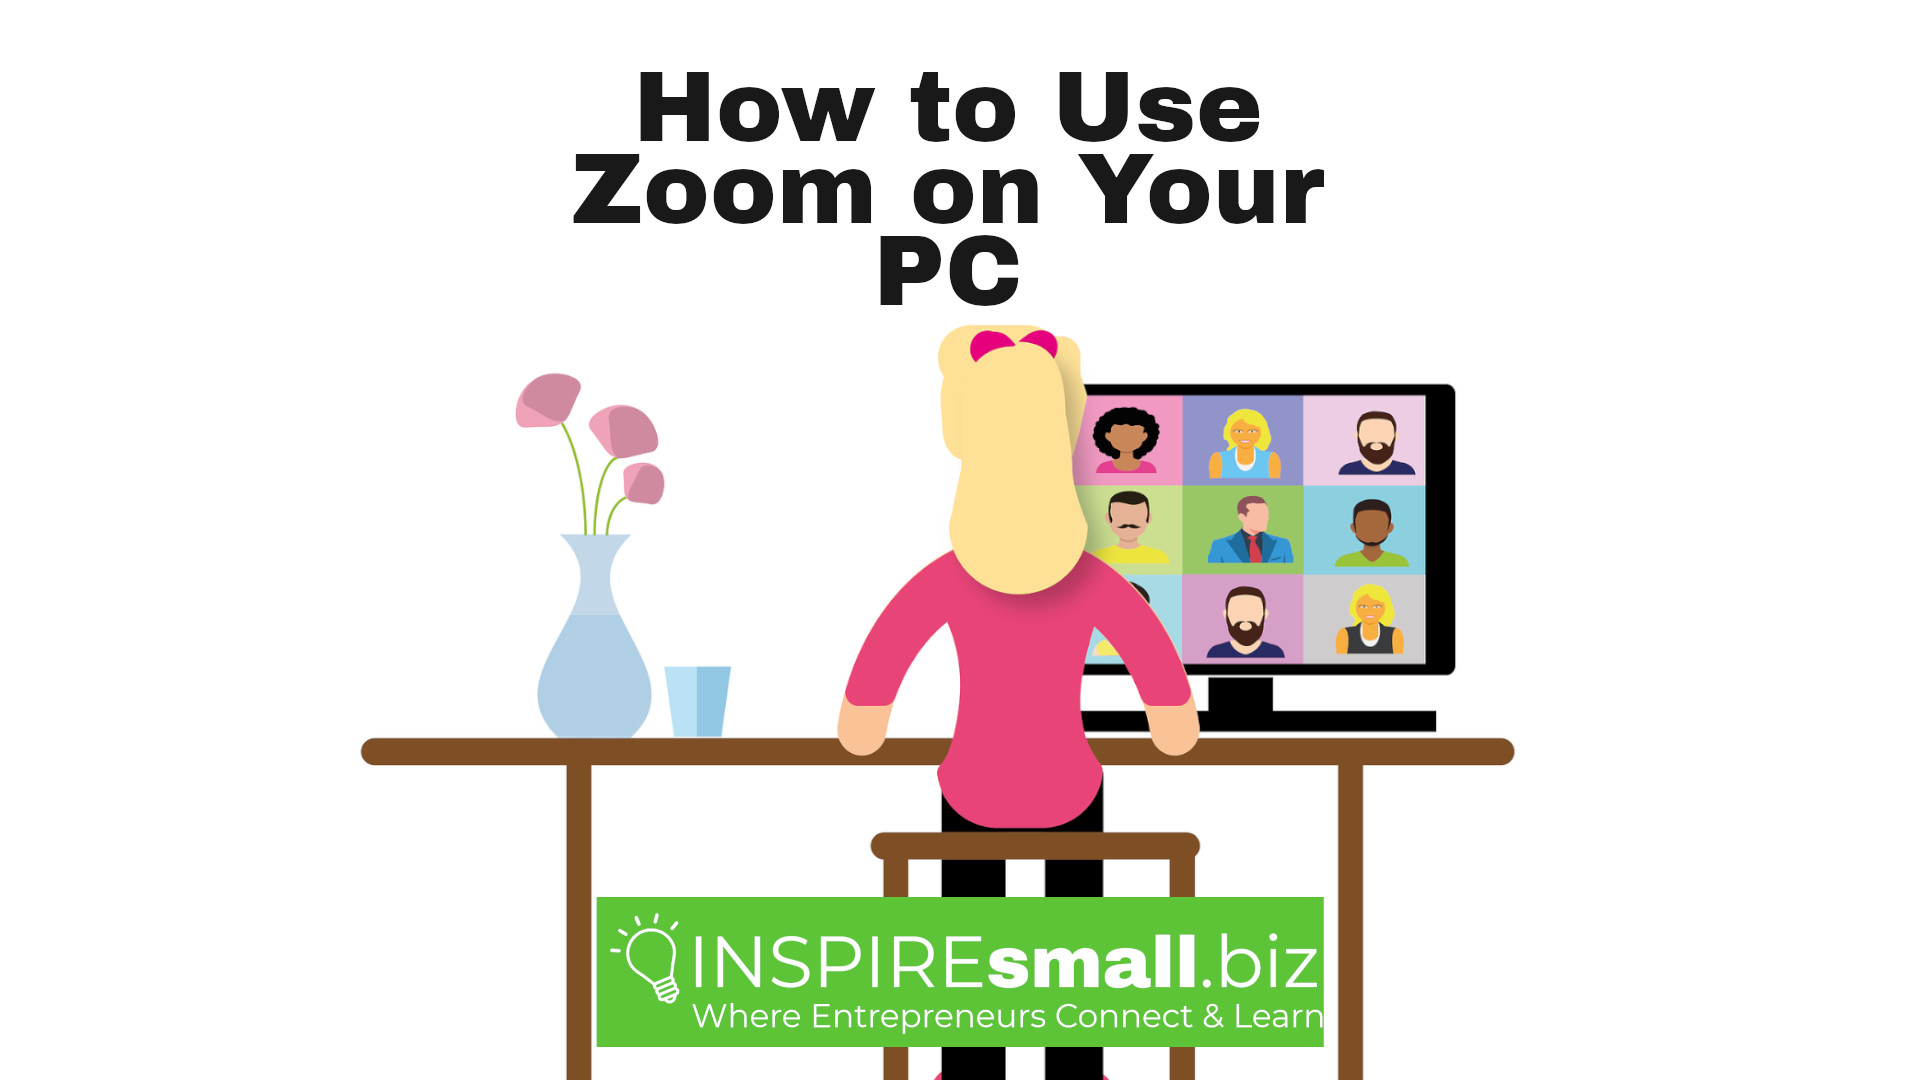 How to Use Zoom on Your PC